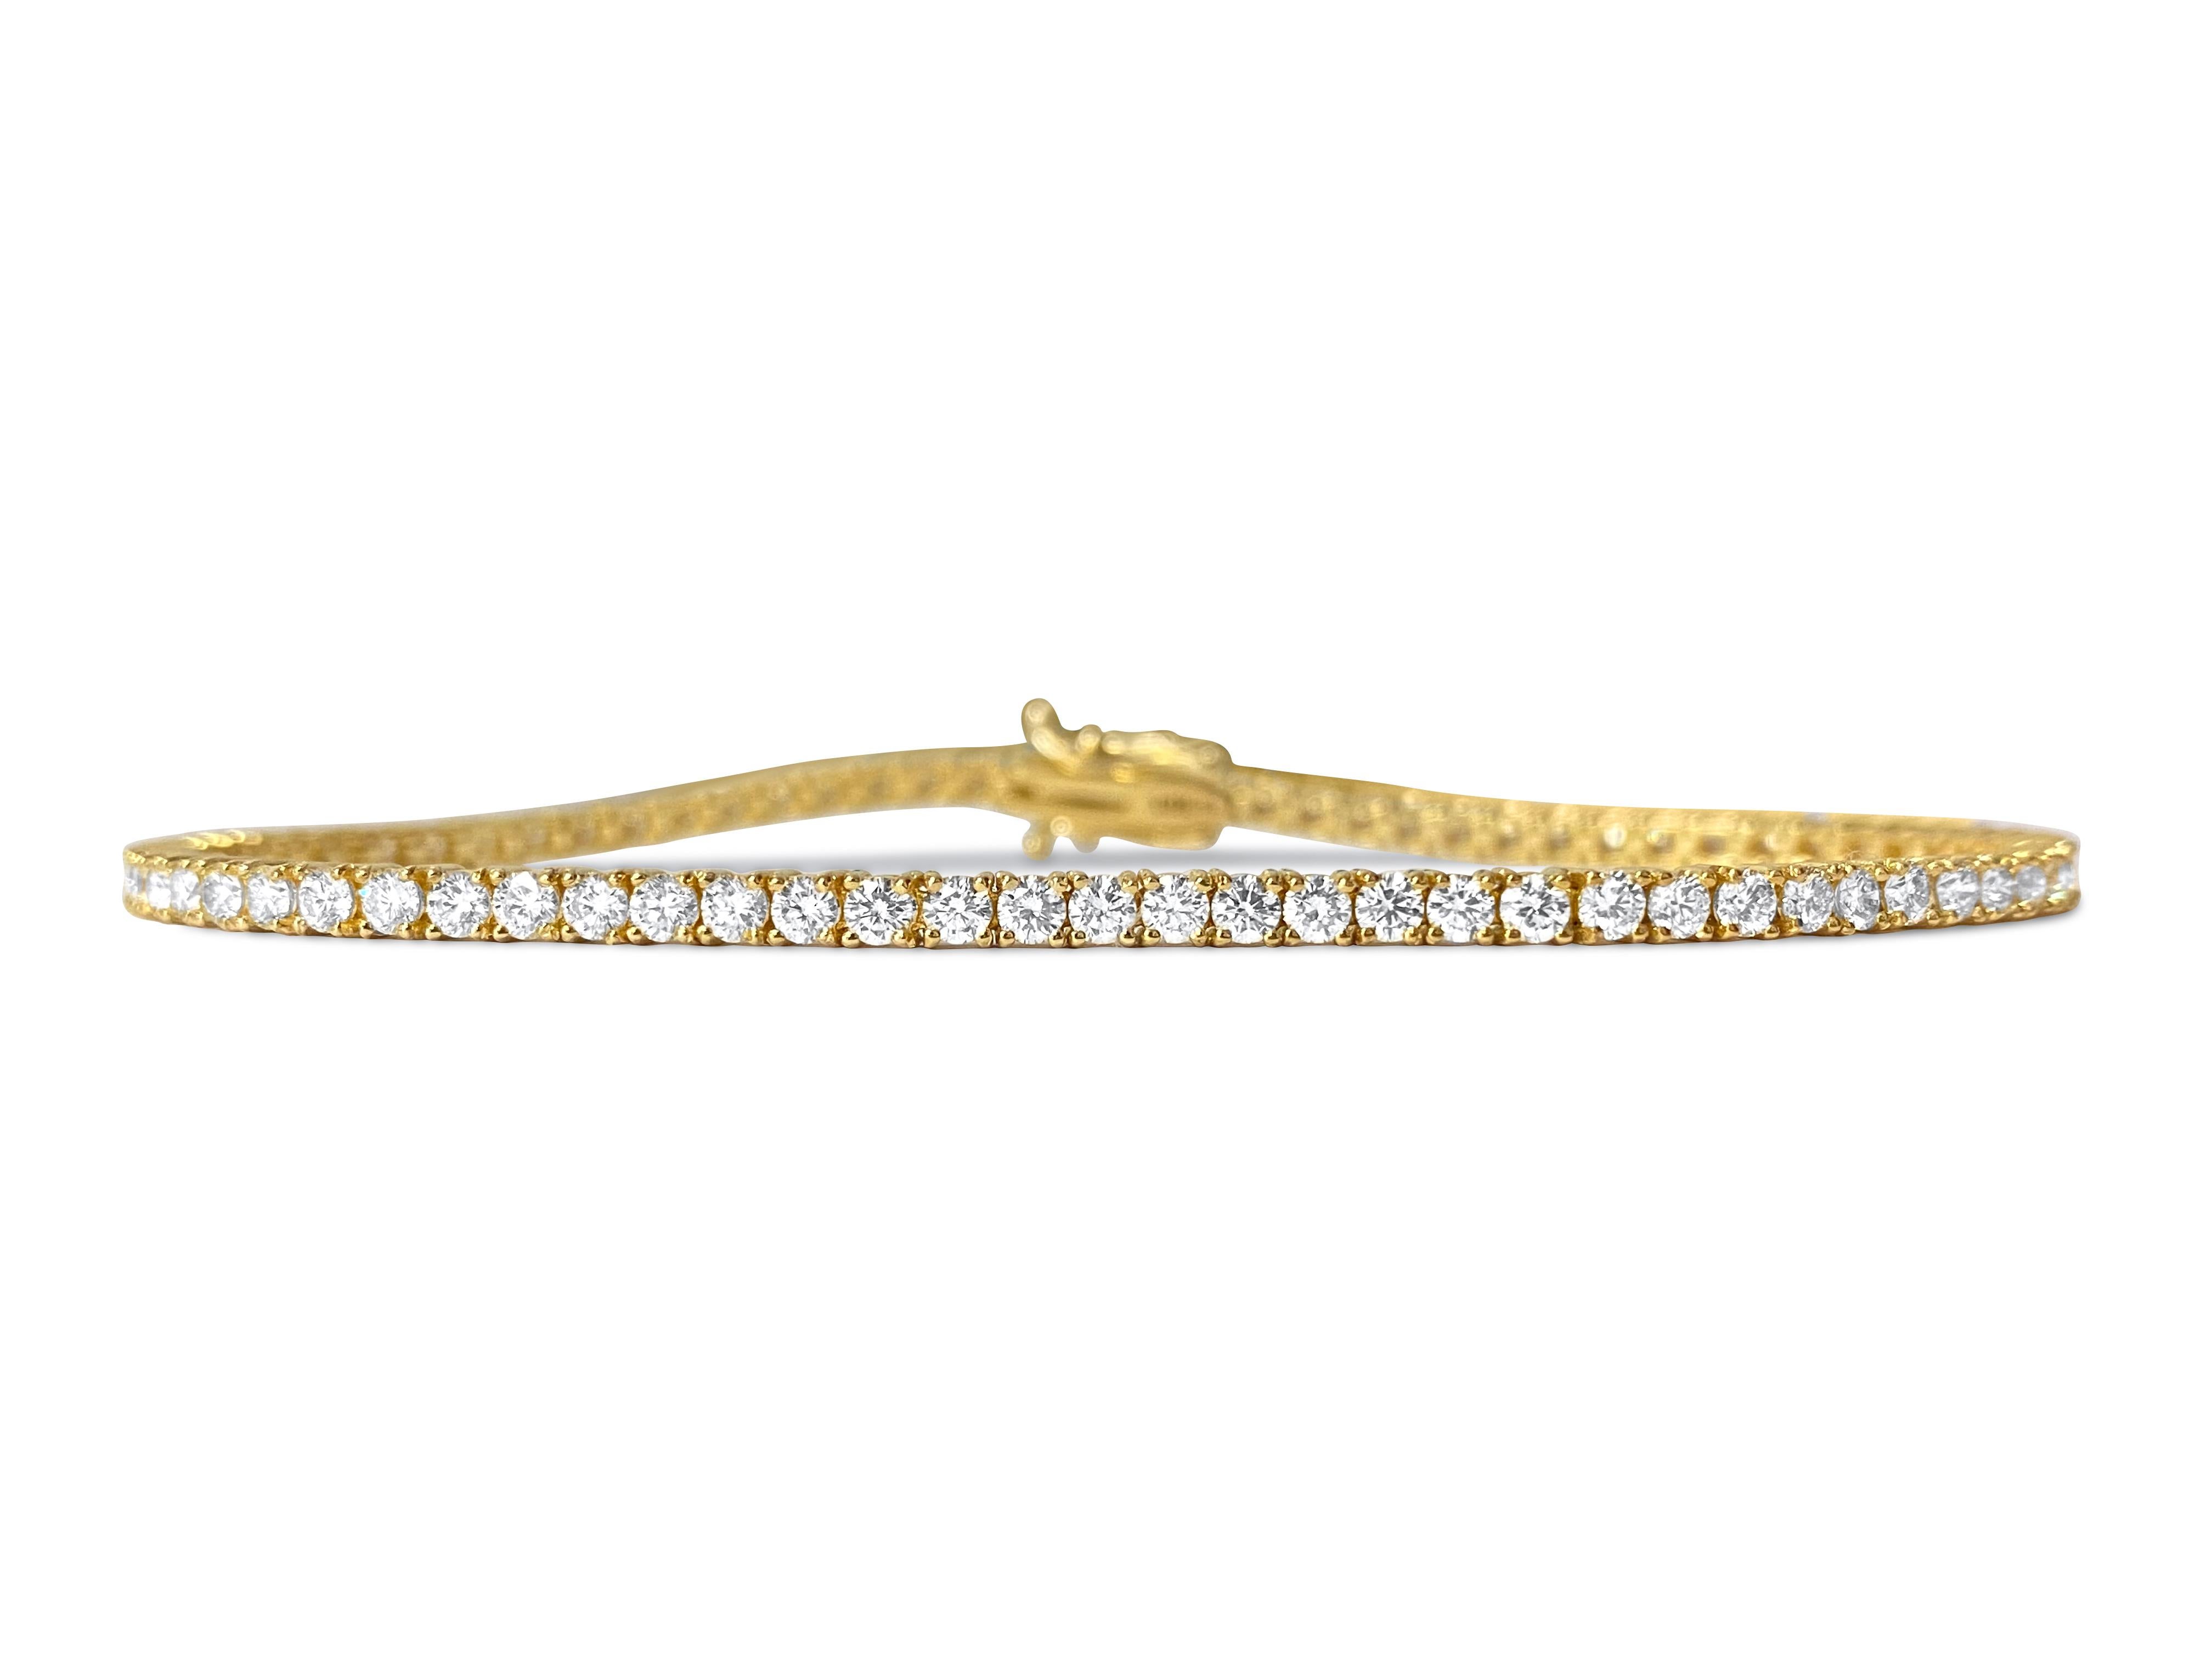 Natural VVS 4.00 Carat Diamond Tennis Bracelet in 10k Yellow Gold In New Condition For Sale In Miami, FL